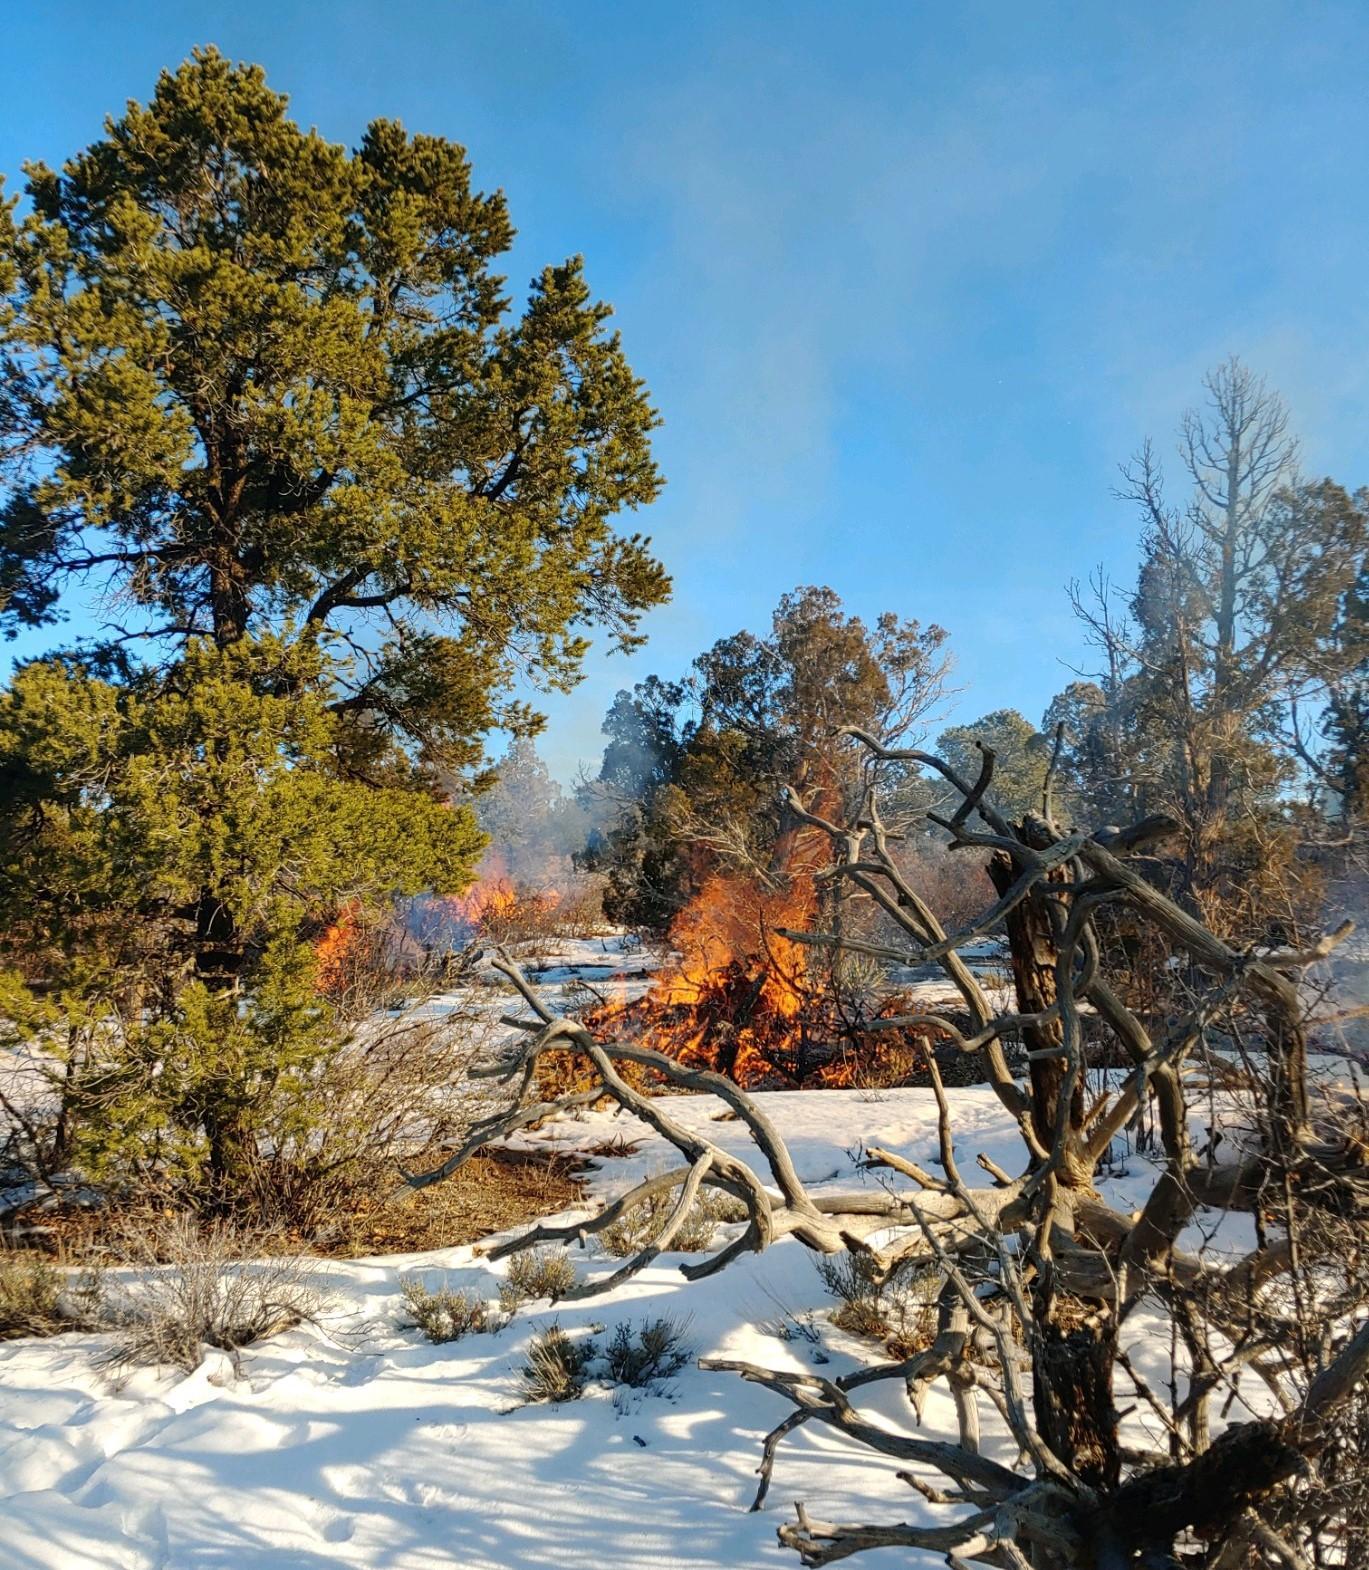 Great day to RX burn piles on West Dolores Rim. Photo has a few piles burning during a prescribe burn.